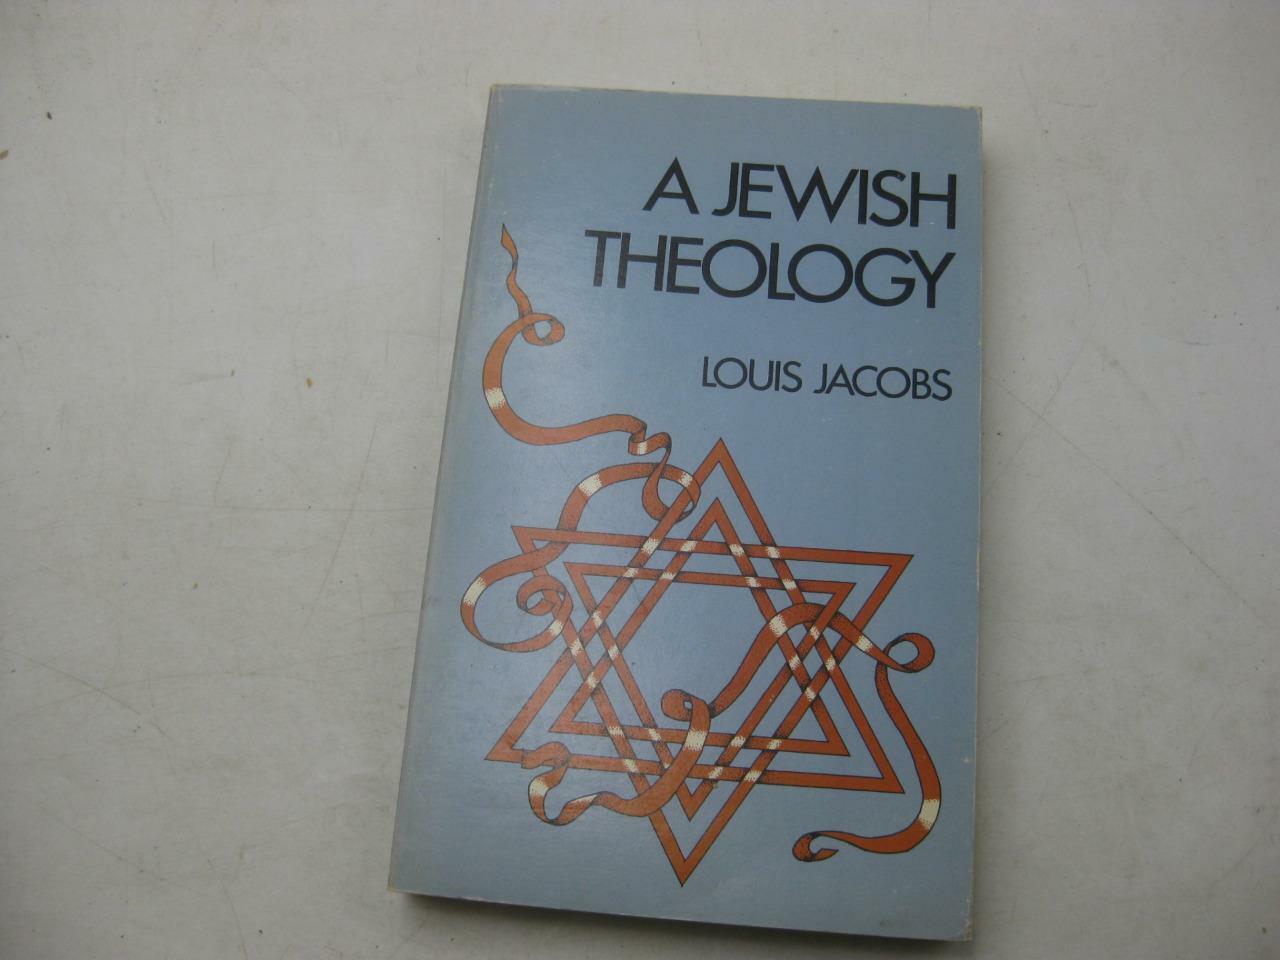 A jewish theology - Louis Jacobs IMPORTANT READ